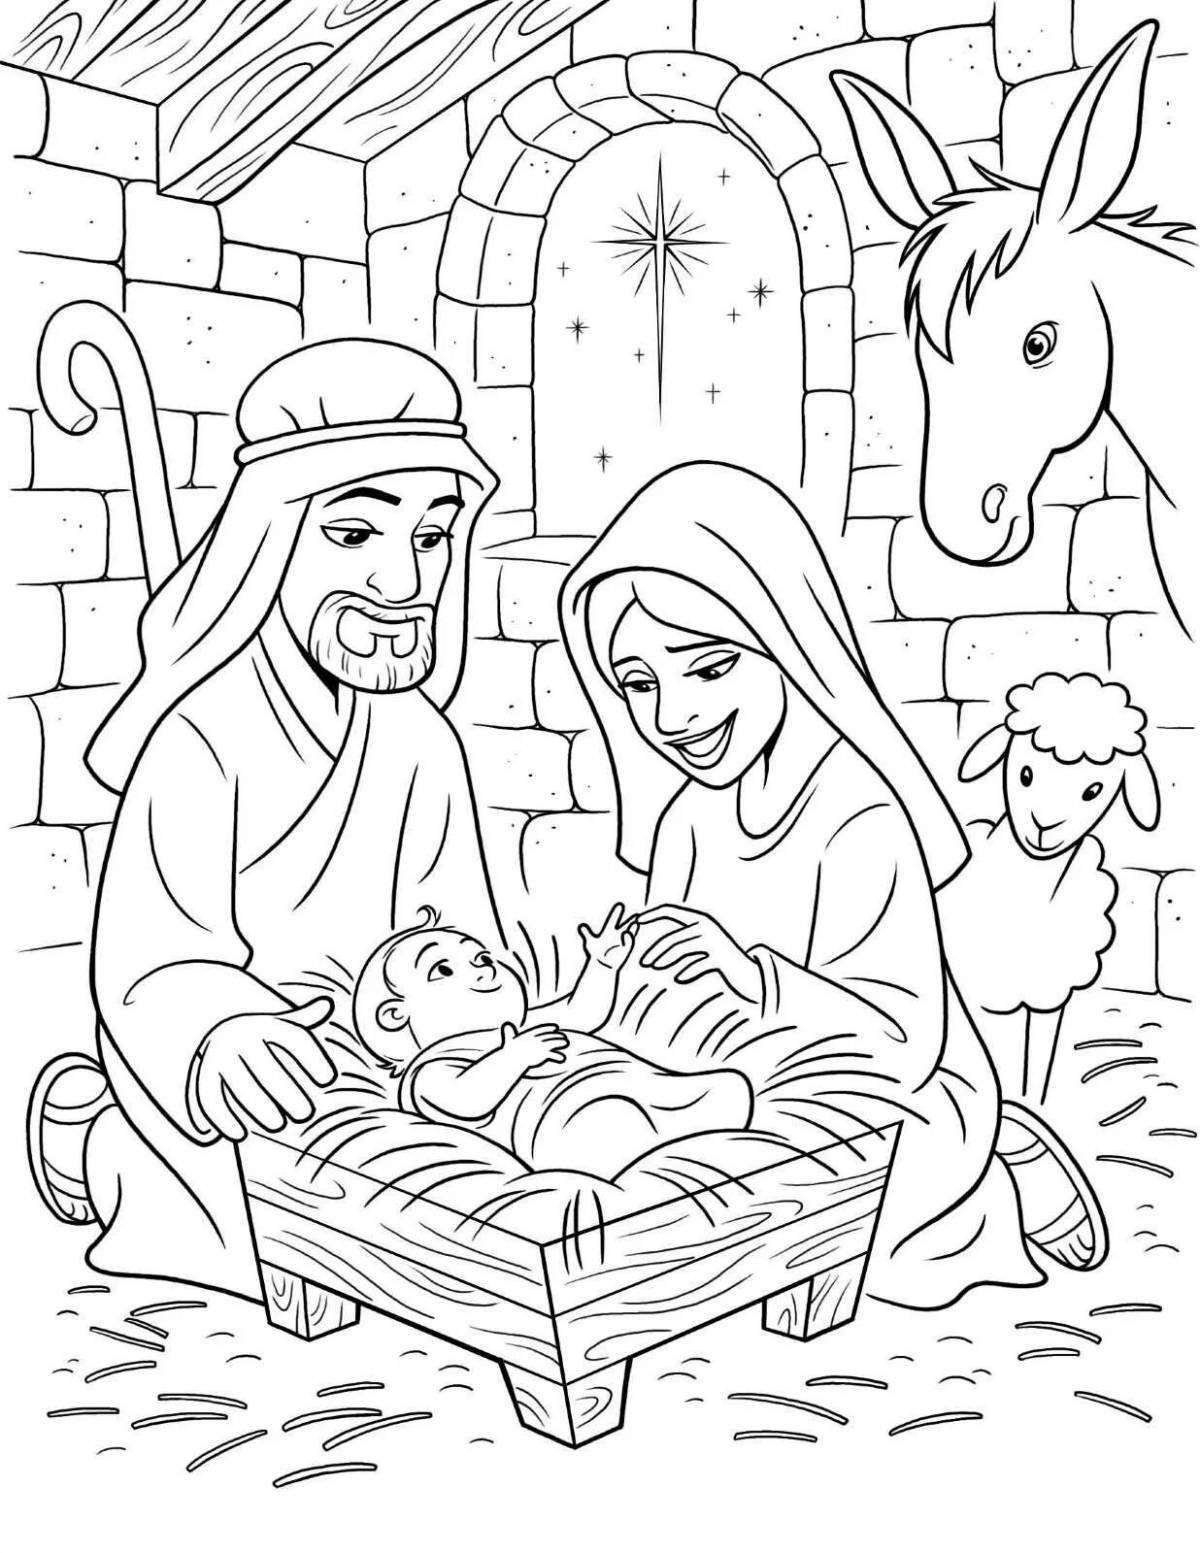 Exalted baby jesus coloring page